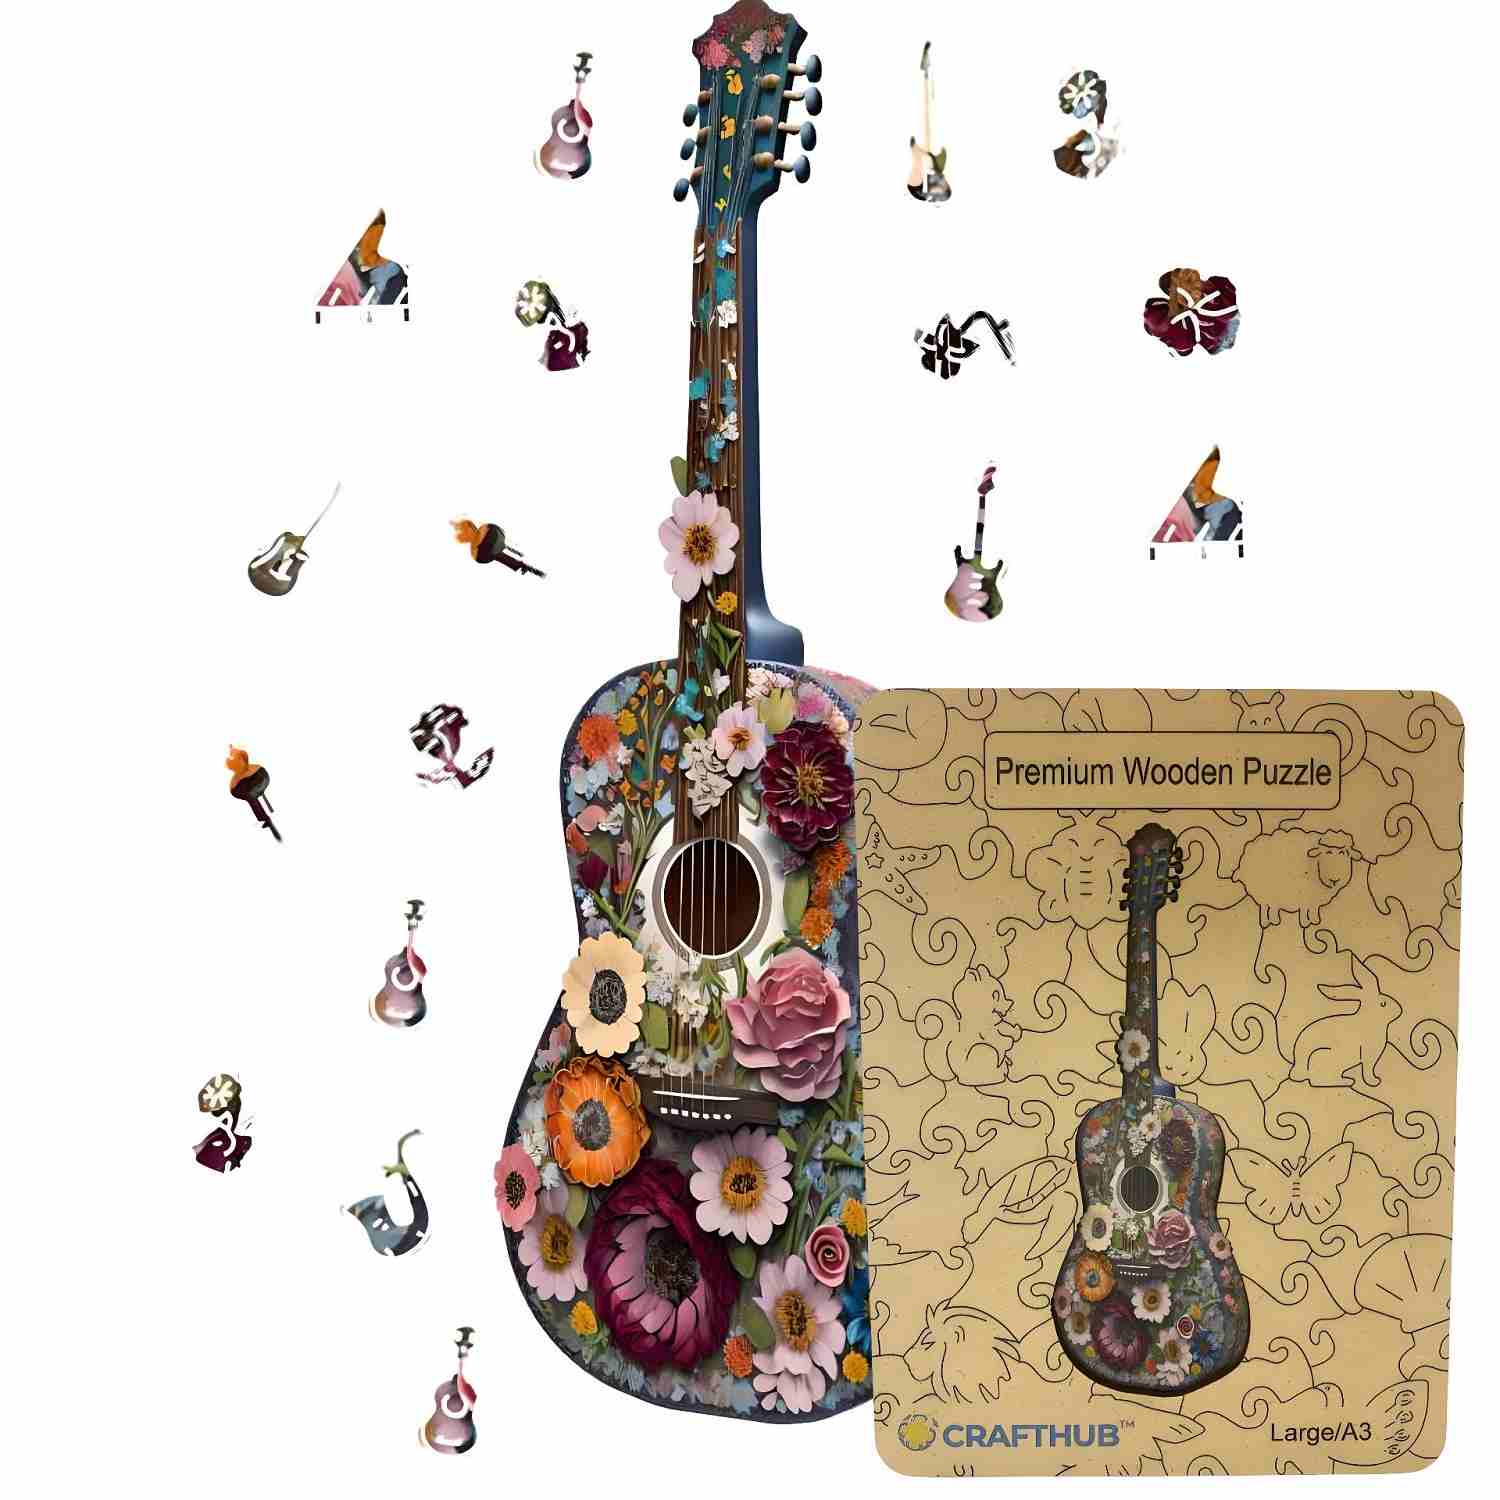 Animal Jigsaw Puzzle > Wooden Jigsaw Puzzle > Jigsaw Puzzle A3+Wooden Box Guitar - Jigsaw Puzzle